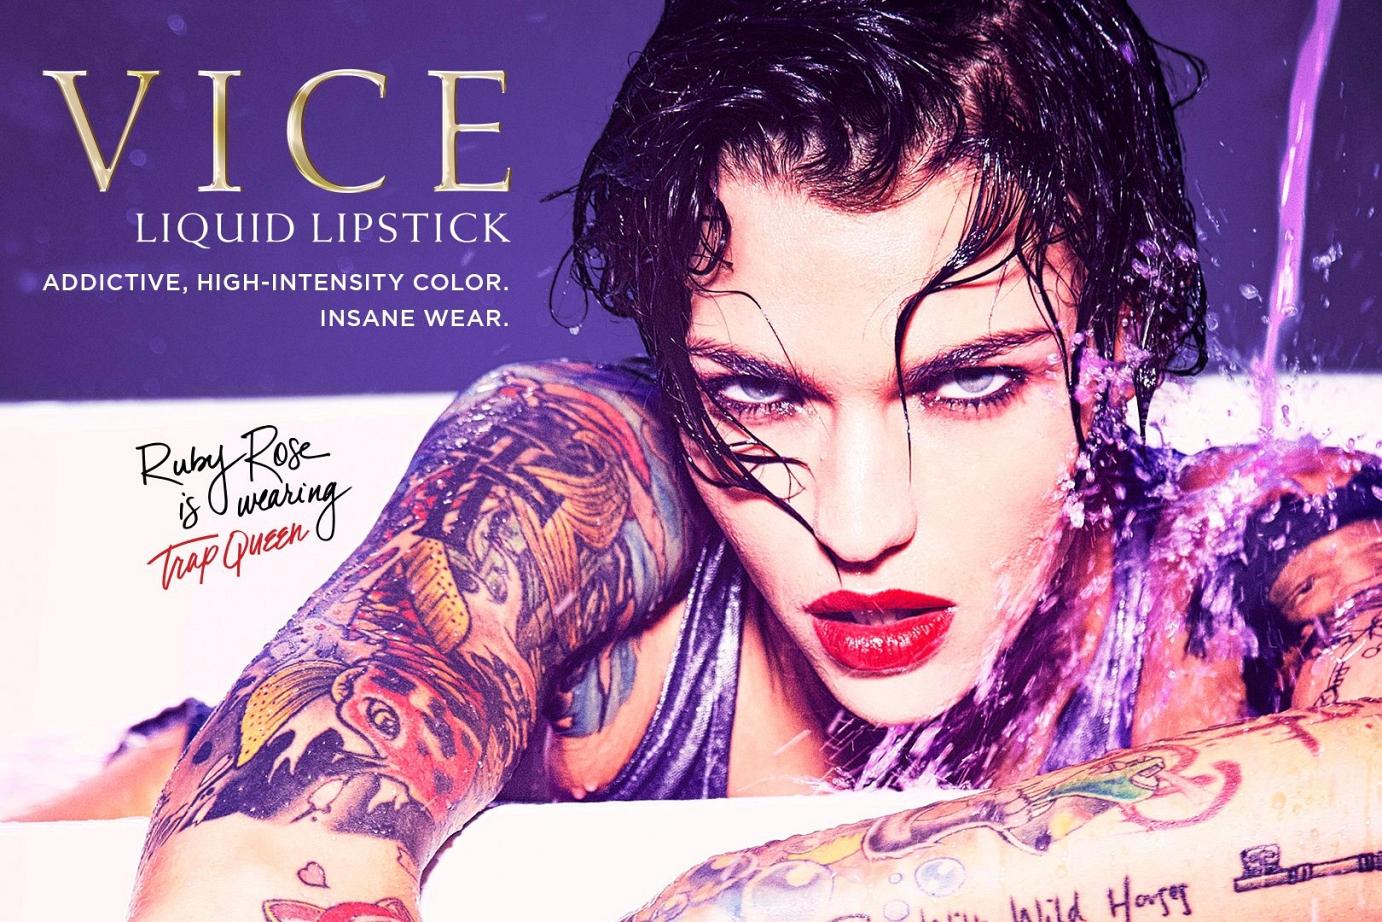 CoqCreative power by ProductionLink s.r.l. Ruby Rose for Urban Decay Ruby-Rose-for-Urban-Decay  Ruby Rose for Urban Decay